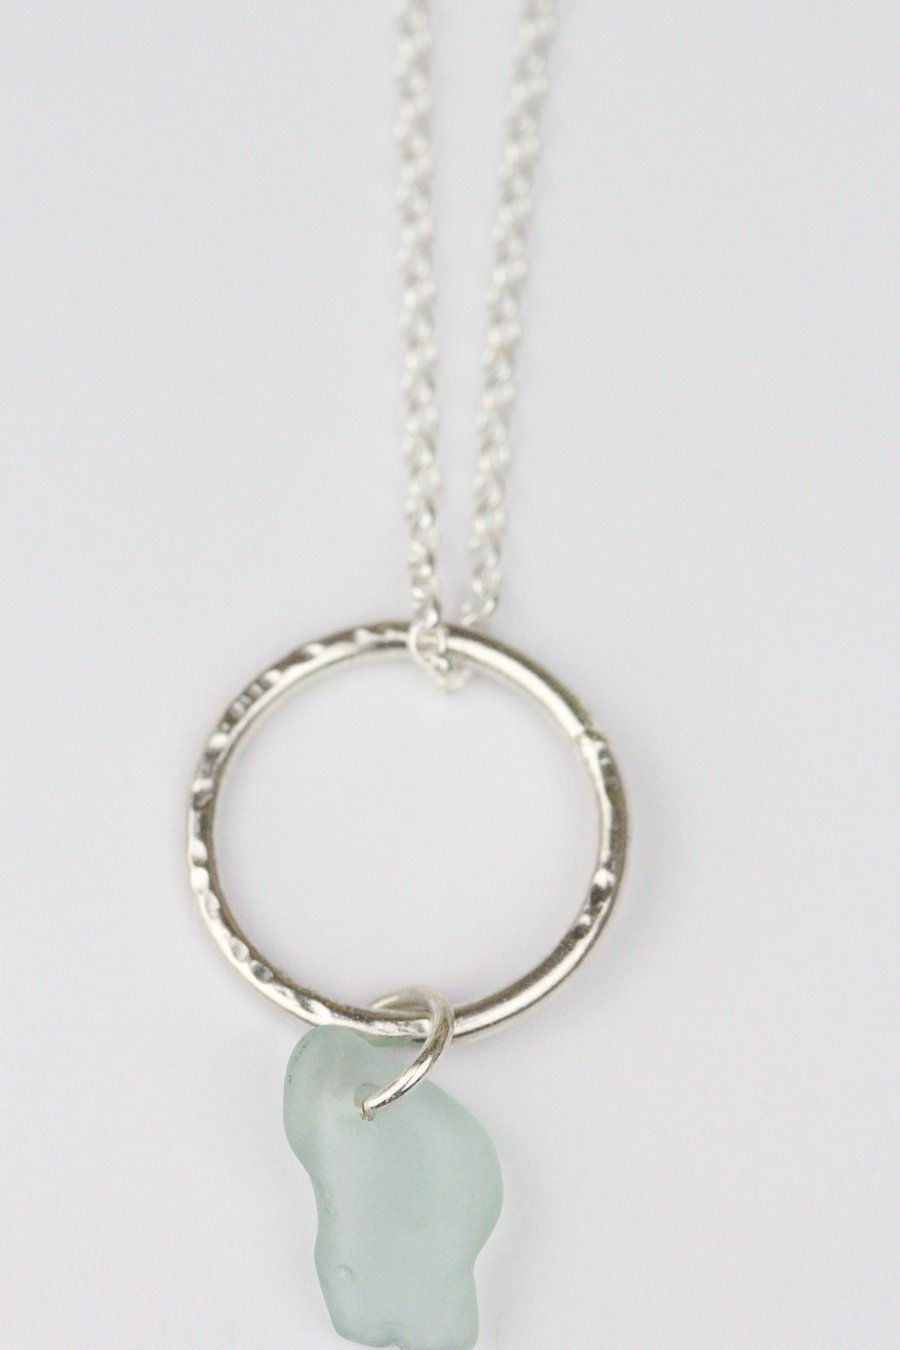 Silver hammered circle necklace with turquoise sea glass